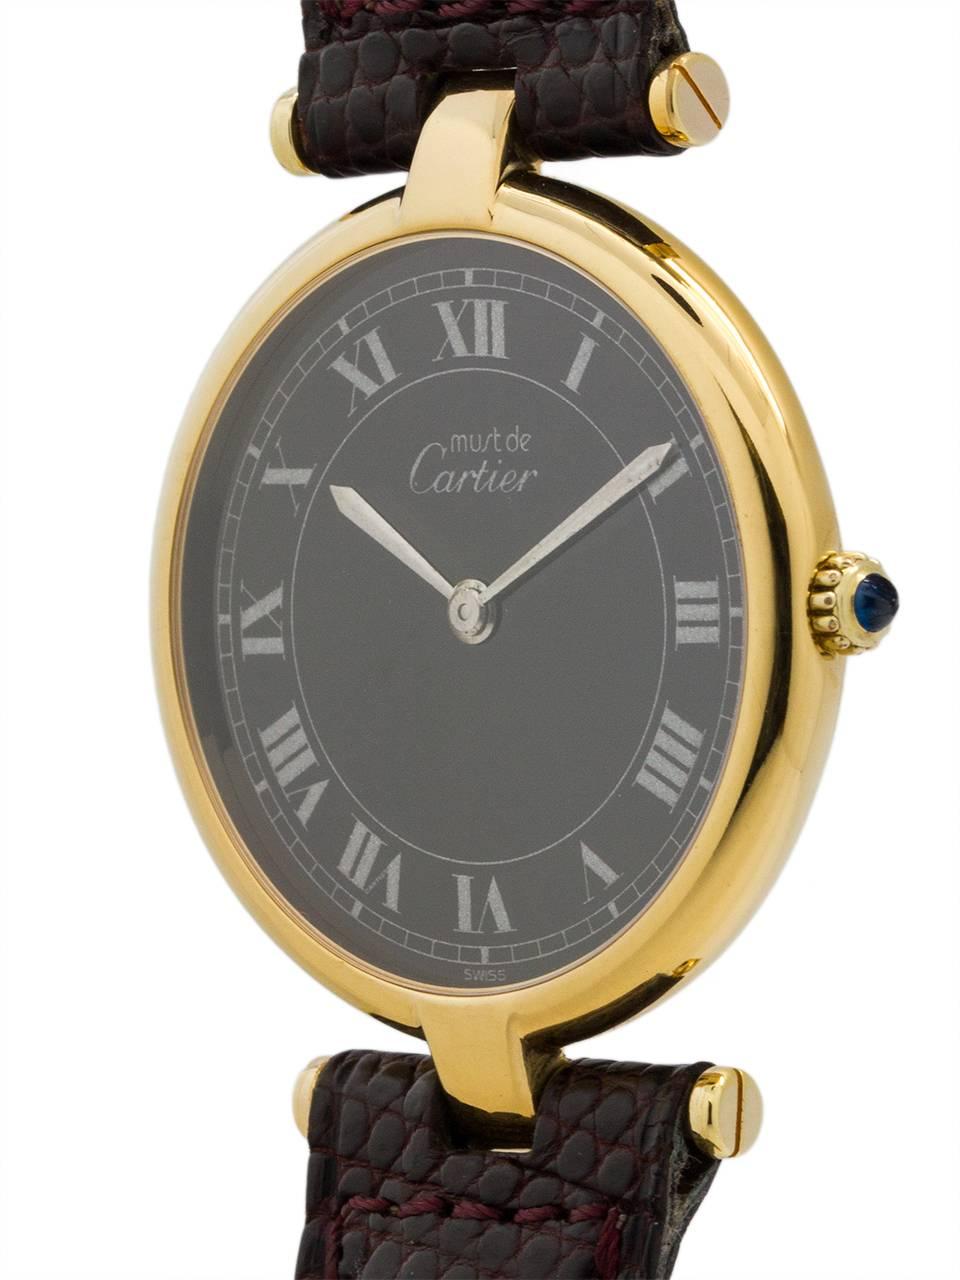 Cartier Man’s Vermeil Vendome Tank Wristwatch circa 1990s. Case measuring 30.5 x 37mm and t-bar lugs. Featuring a rare original black dial with printed Roman numbers and outer minute track. Quartz movement with cabochon sapphire crown. With reddish